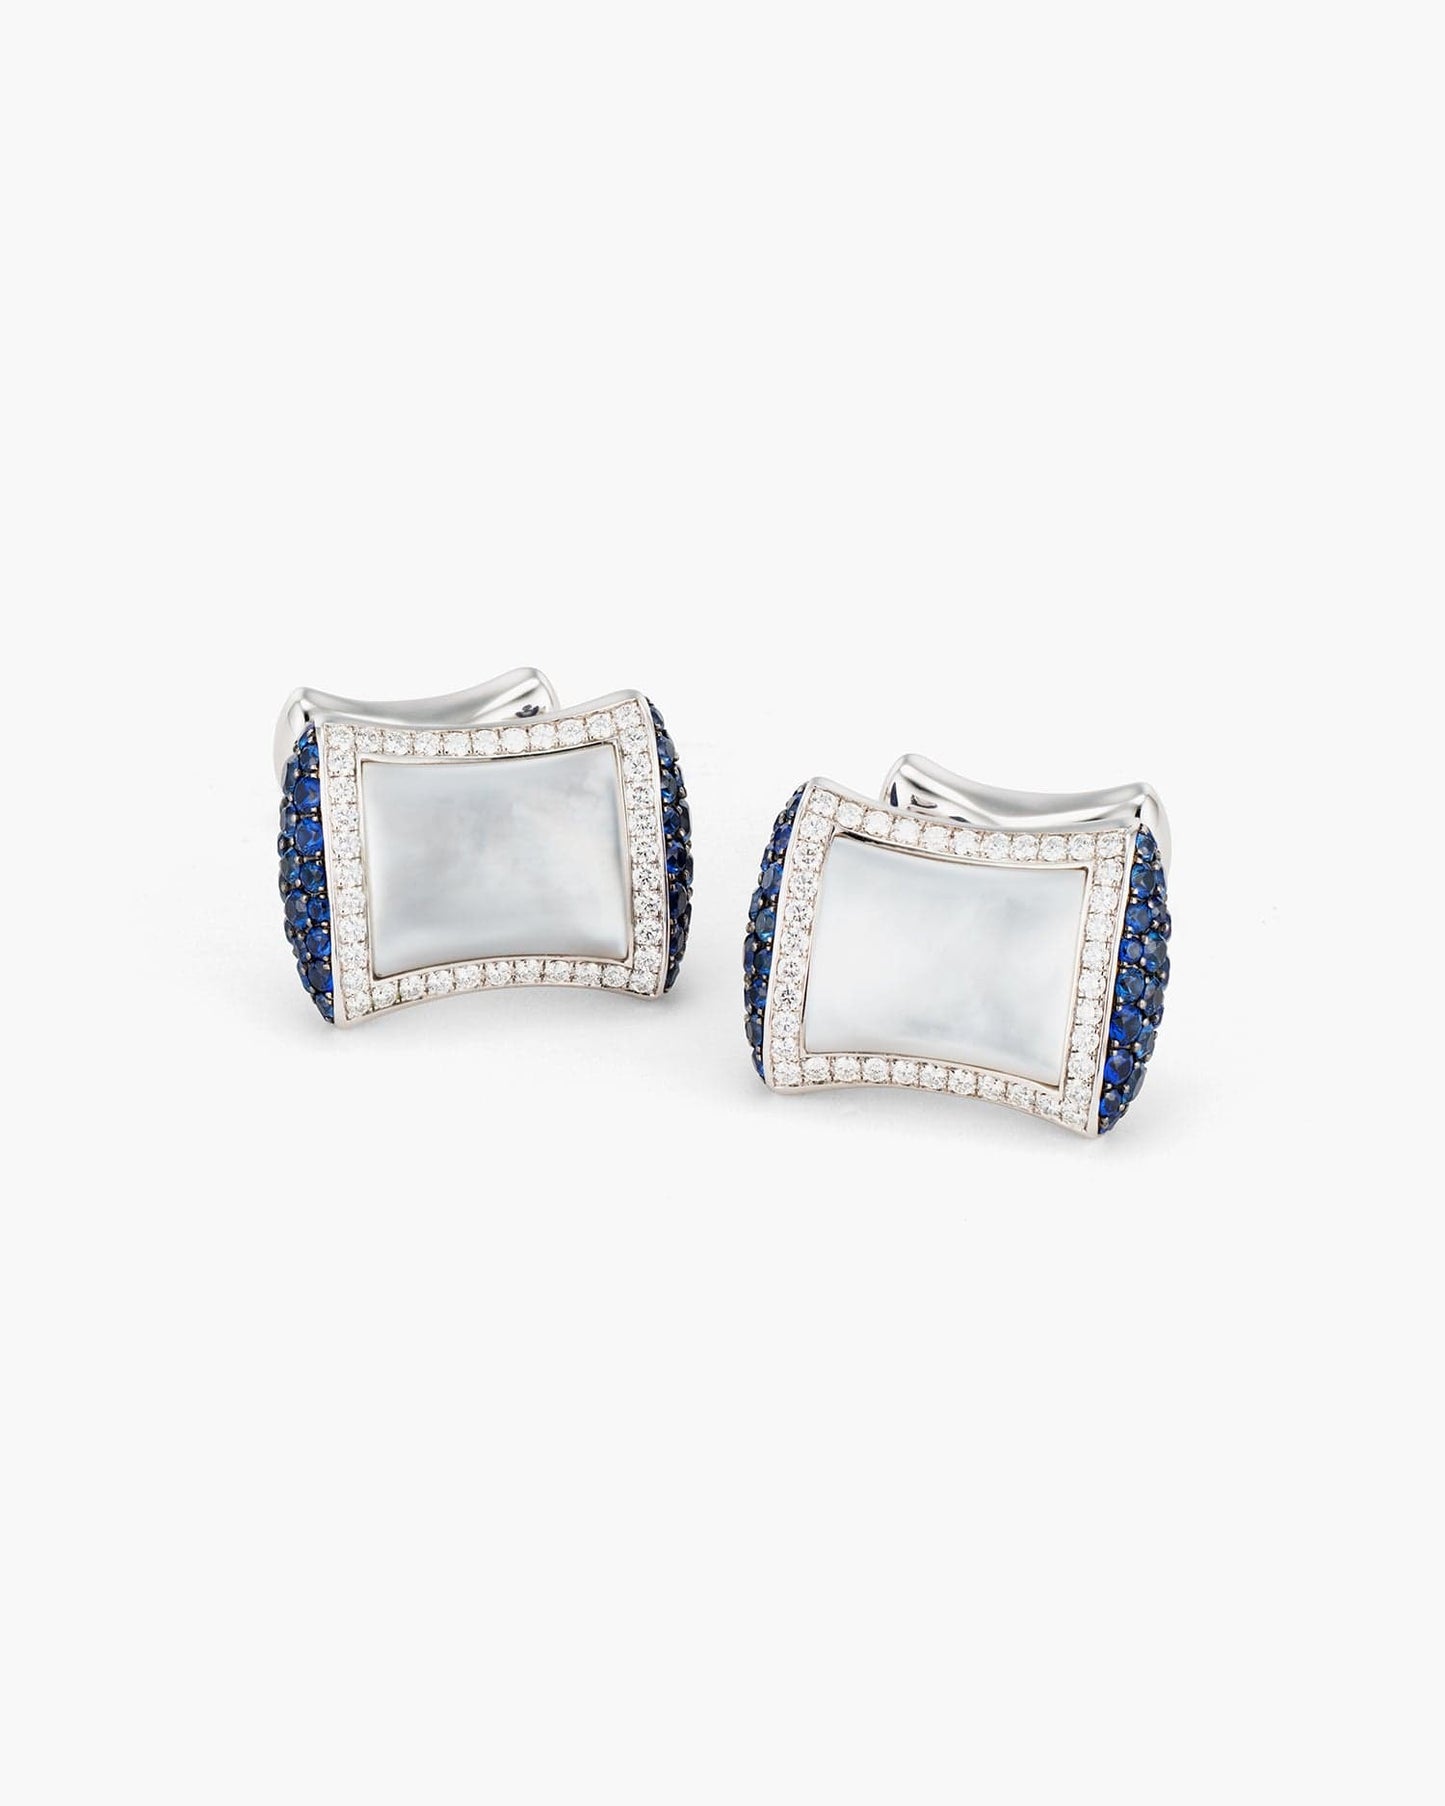 Diamond, Sapphire and Mother of Pearl Bow Cufflinks